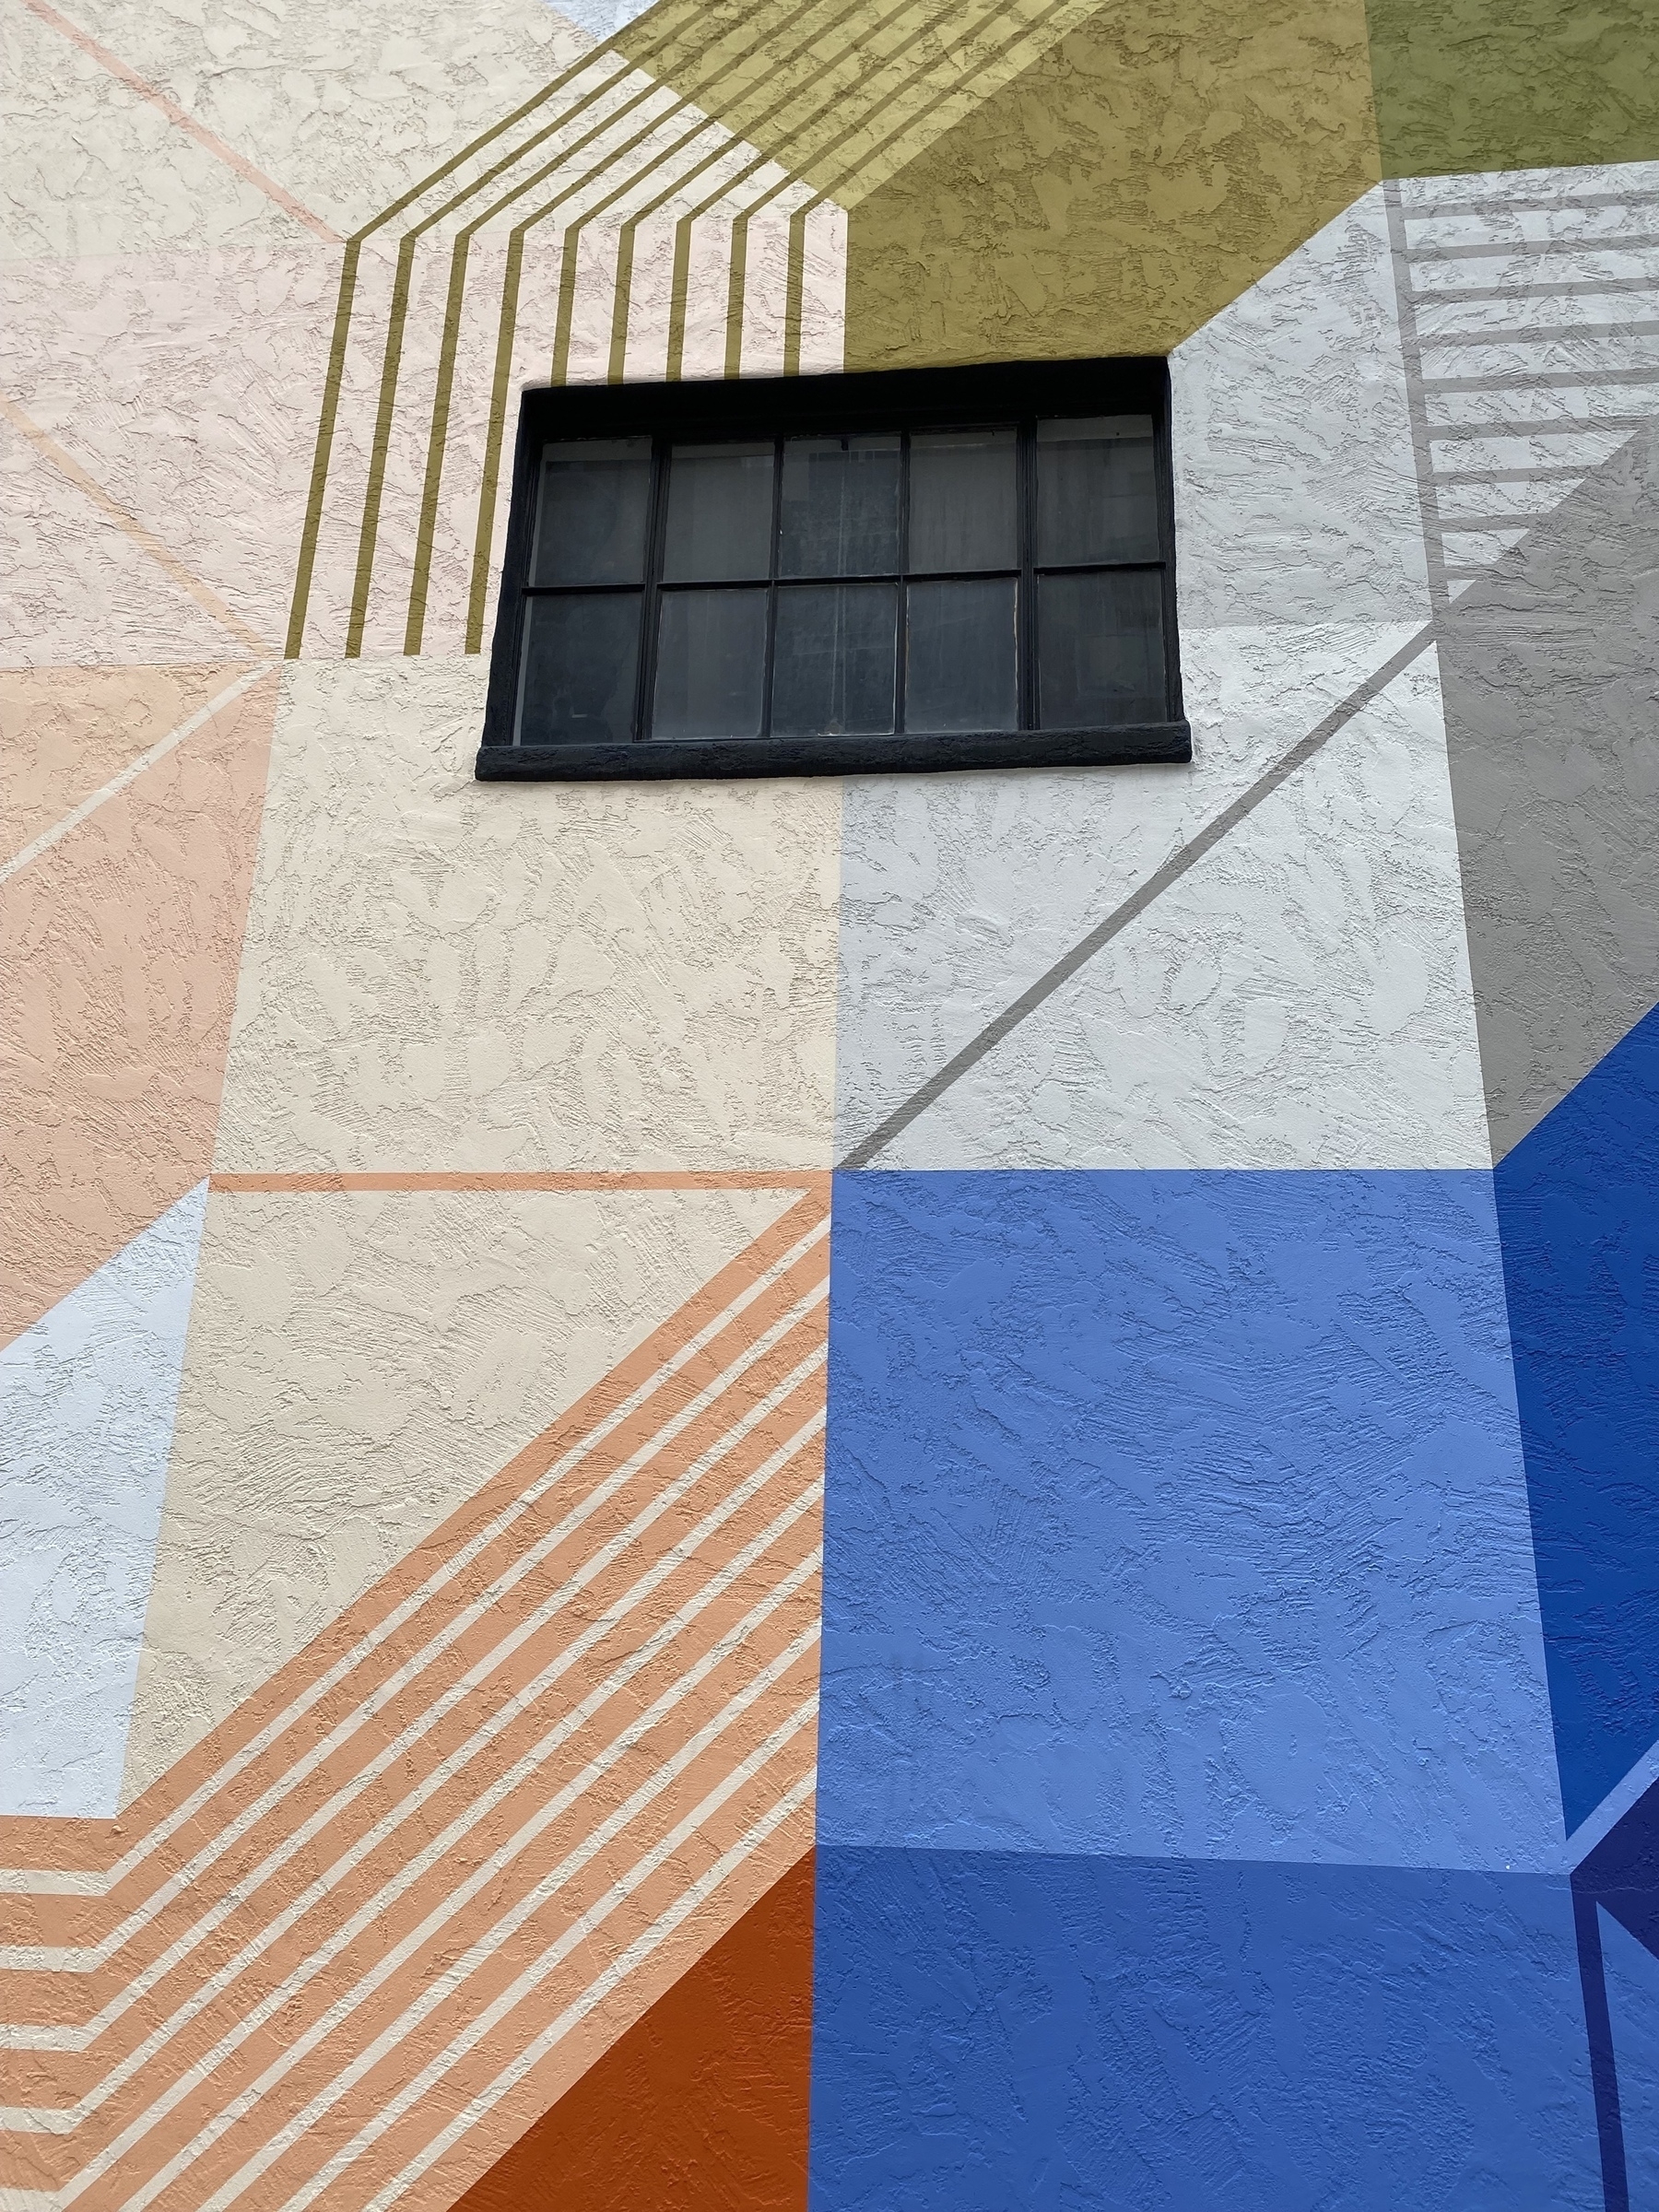 Mural on the side of a building of geometric shapes in various colors, a single dark window centered above.